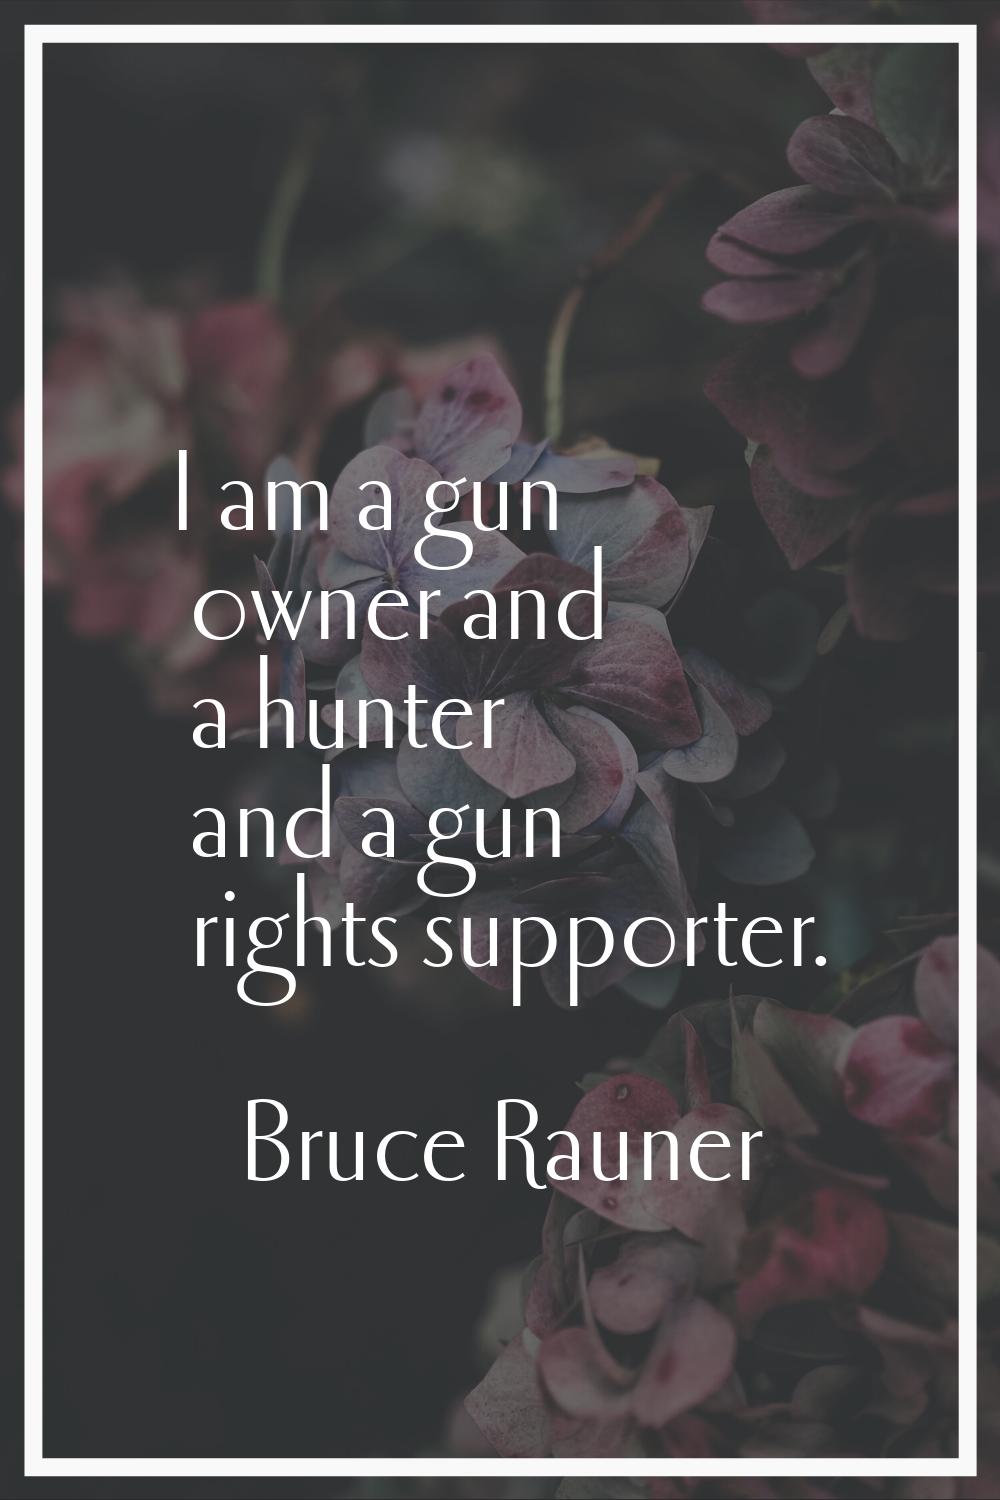 I am a gun owner and a hunter and a gun rights supporter.